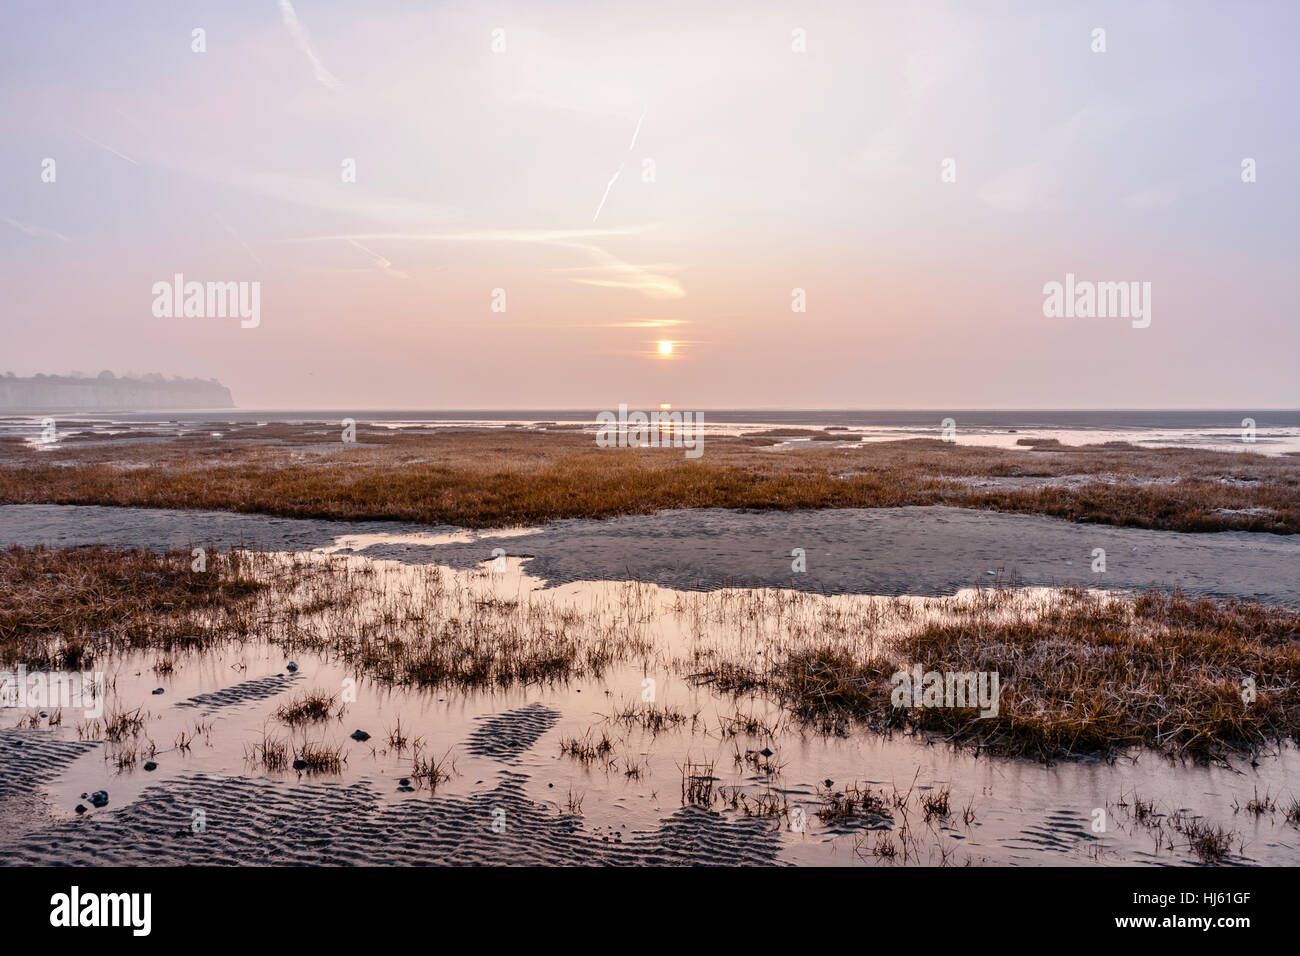 Sunrise over the English Channel at Pegwell Bay. Salt water marshes at low tide with many clumps of spartina grass growing in foreground. Hazy sky. Stock Photo